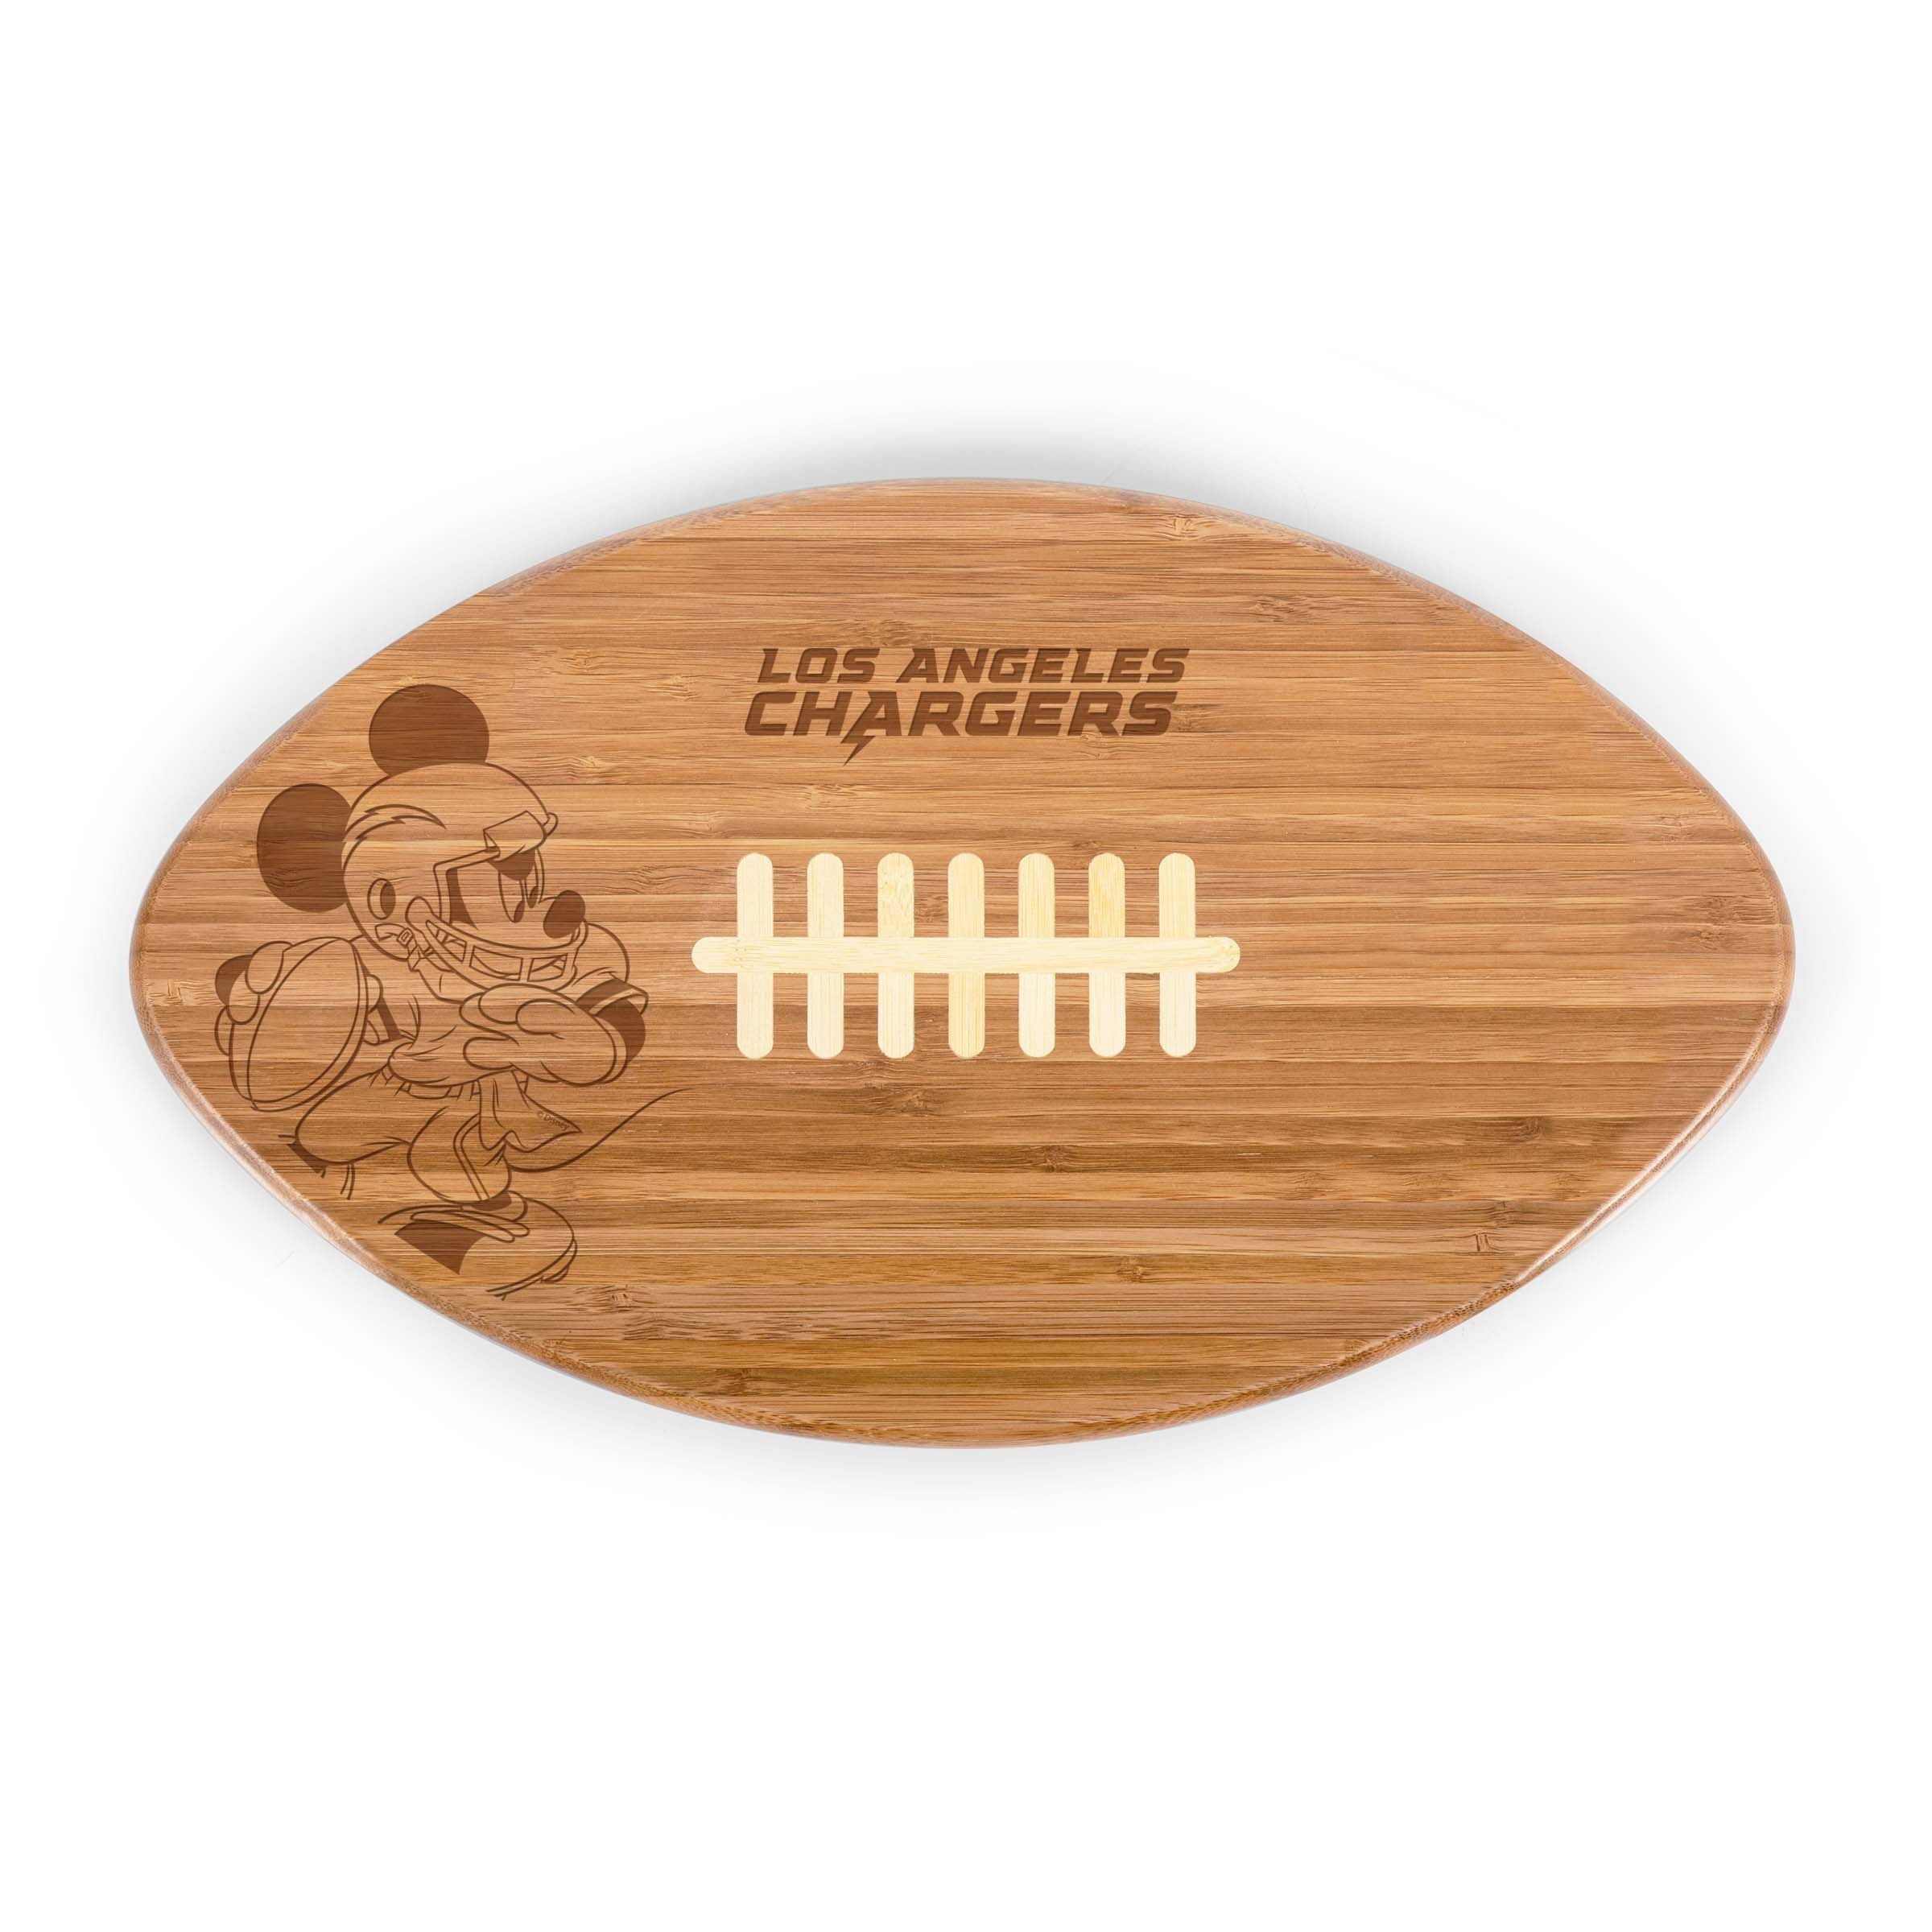 Los Angeles Chargers Mickey Mouse - Touchdown! Football Cutting Board & Serving Tray